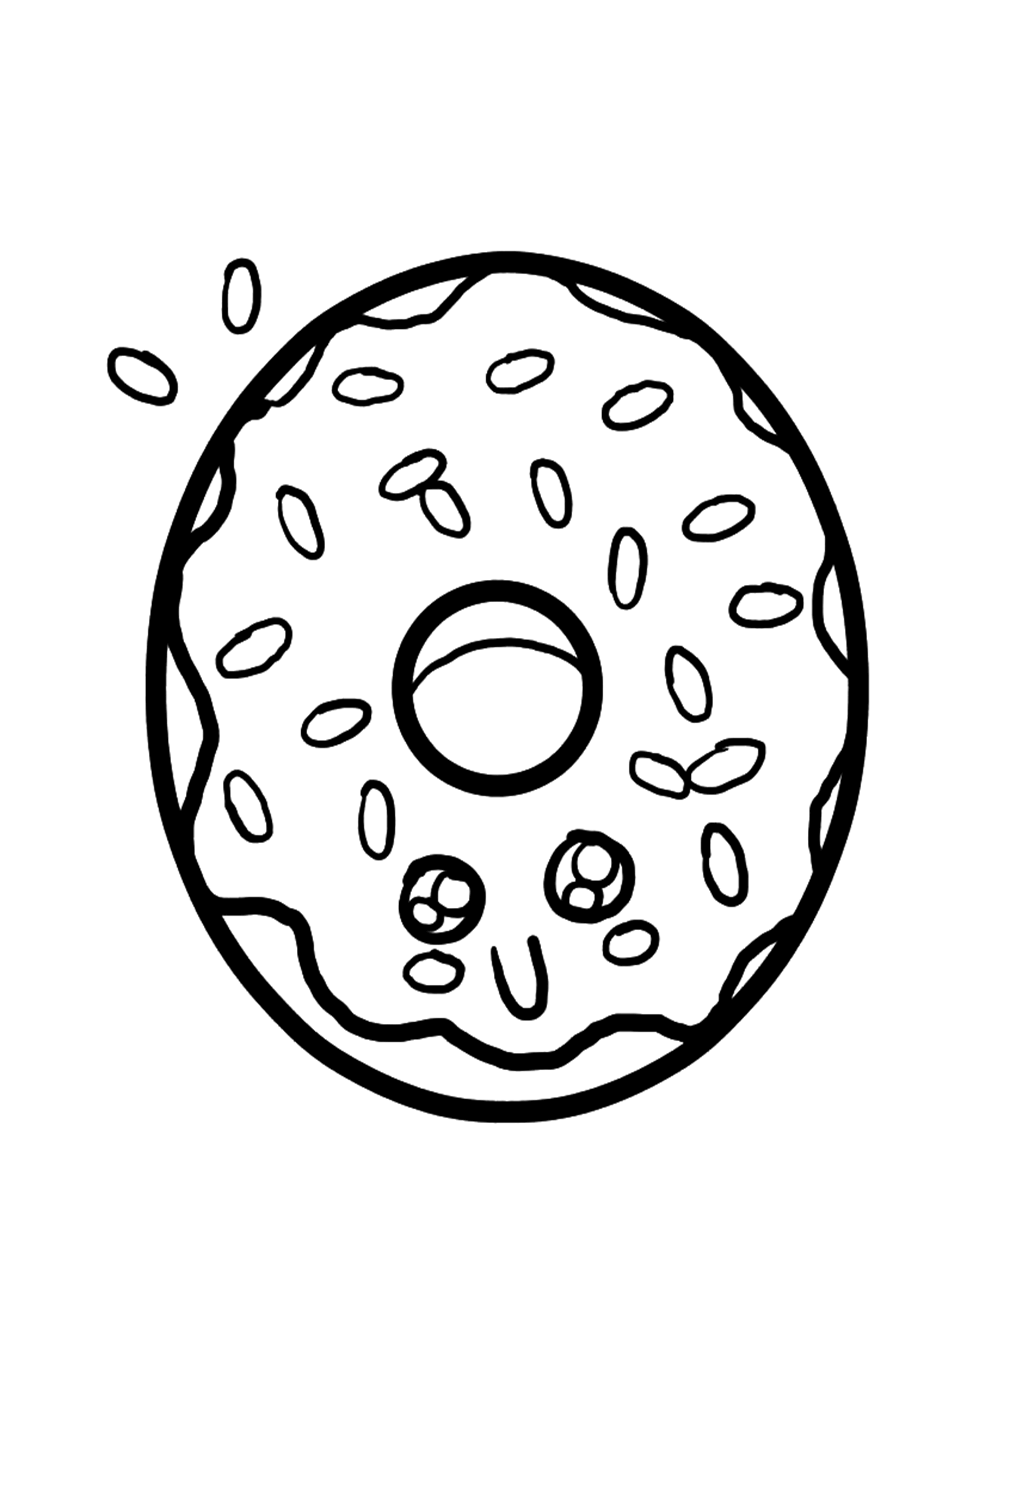 Donut Coloring Pages For Preschool Coloring Page